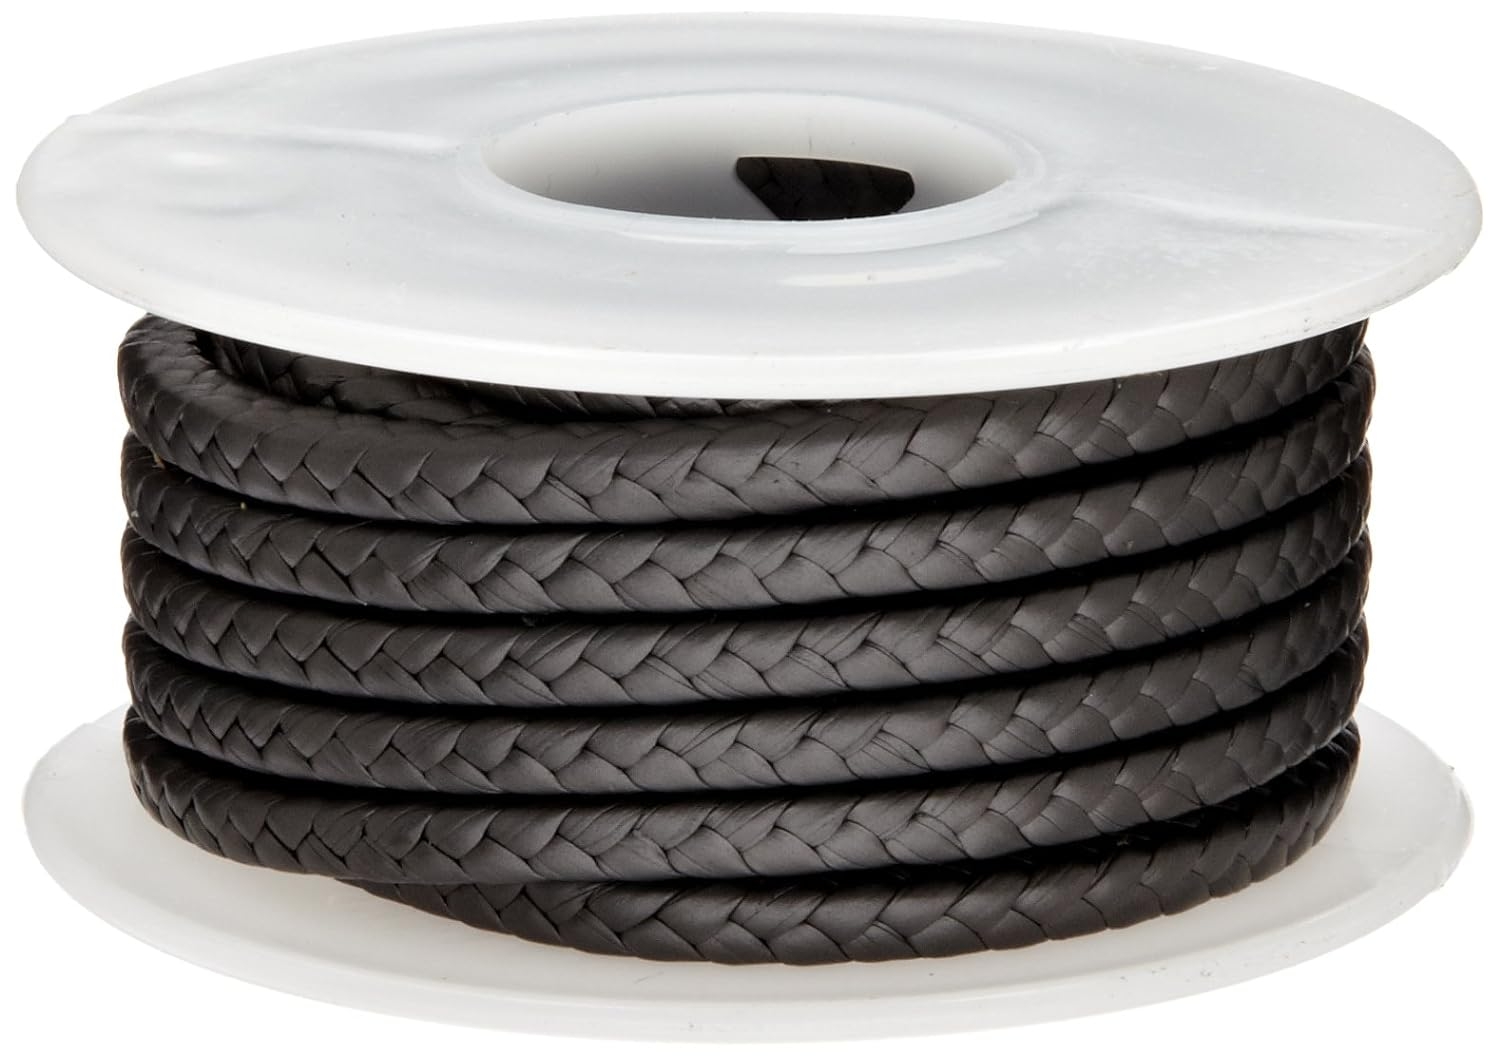 Palmetto 1382 Series Expanded PTFE with Graphite Compression Packing Seal, Dull Black, 1/2" Square, 10' Length